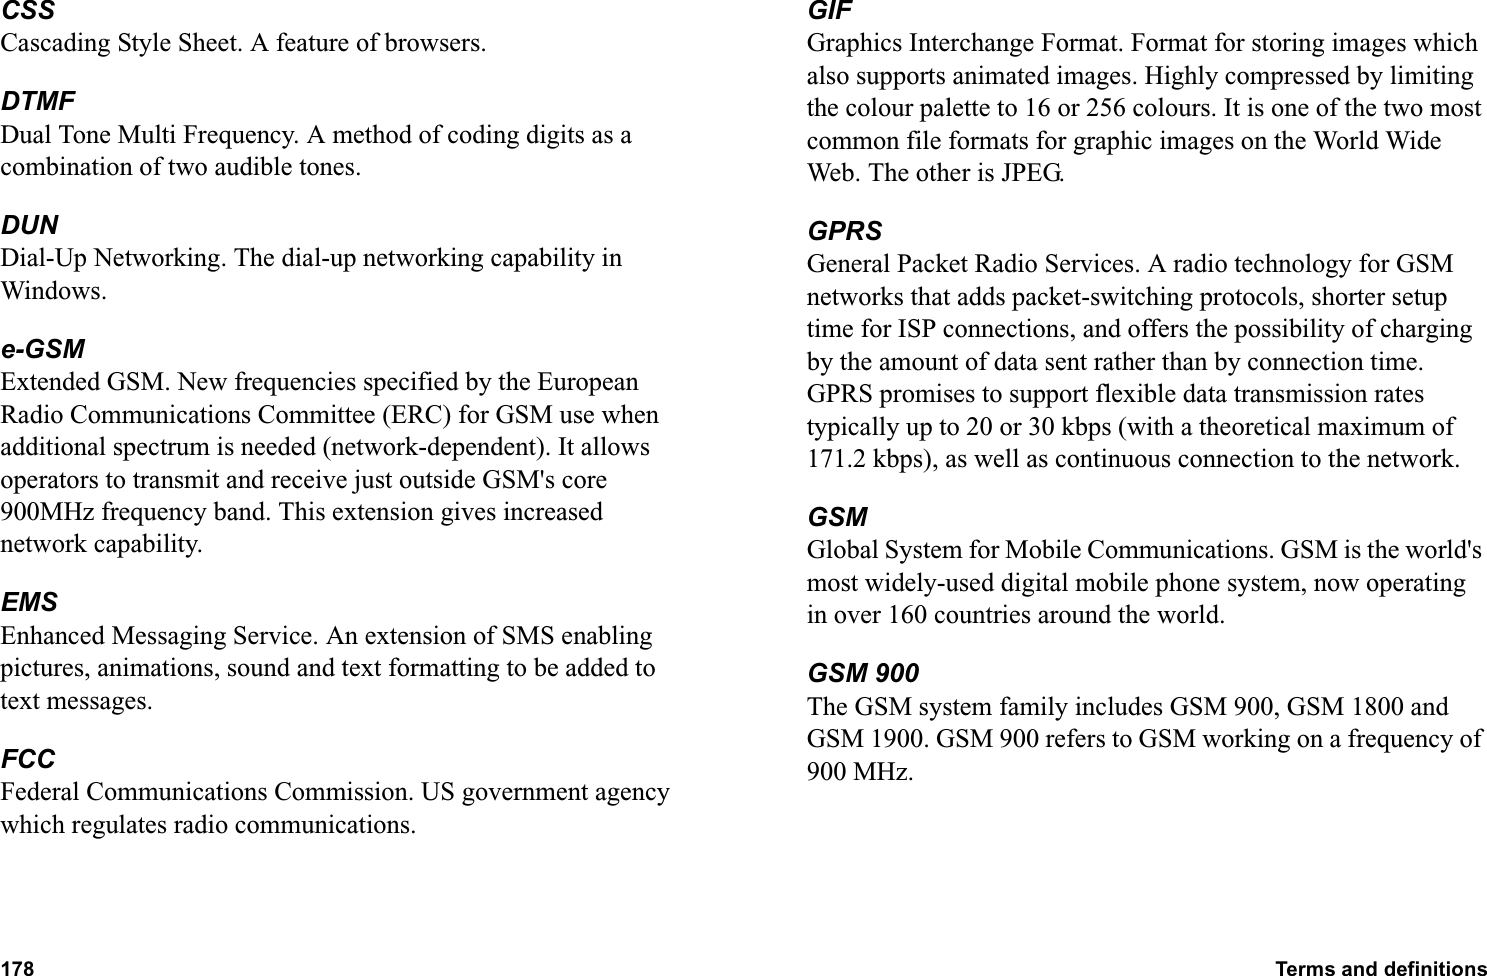 178 Terms and definitions  CSSCascading Style Sheet. A feature of browsers.DTMFDual Tone Multi Frequency. A method of coding digits as a combination of two audible tones.DUNDial-Up Networking. The dial-up networking capability in Windows.e-GSMExtended GSM. New frequencies specified by the European Radio Communications Committee (ERC) for GSM use when additional spectrum is needed (network-dependent). It allows operators to transmit and receive just outside GSM&apos;s core 900MHz frequency band. This extension gives increased network capability.EMSEnhanced Messaging Service. An extension of SMS enabling pictures, animations, sound and text formatting to be added to text messages.FCCFederal Communications Commission. US government agency which regulates radio communications.GIFGraphics Interchange Format. Format for storing images which also supports animated images. Highly compressed by limiting the colour palette to 16 or 256 colours. It is one of the two most common file formats for graphic images on the World Wide Web. The other is JPEG.GPRSGeneral Packet Radio Services. A radio technology for GSM networks that adds packet-switching protocols, shorter setup time for ISP connections, and offers the possibility of charging by the amount of data sent rather than by connection time. GPRS promises to support flexible data transmission rates typically up to 20 or 30 kbps (with a theoretical maximum of 171.2 kbps), as well as continuous connection to the network. GSMGlobal System for Mobile Communications. GSM is the world&apos;s most widely-used digital mobile phone system, now operating in over 160 countries around the world.GSM 900The GSM system family includes GSM 900, GSM 1800 and GSM 1900. GSM 900 refers to GSM working on a frequency of 900 MHz. 